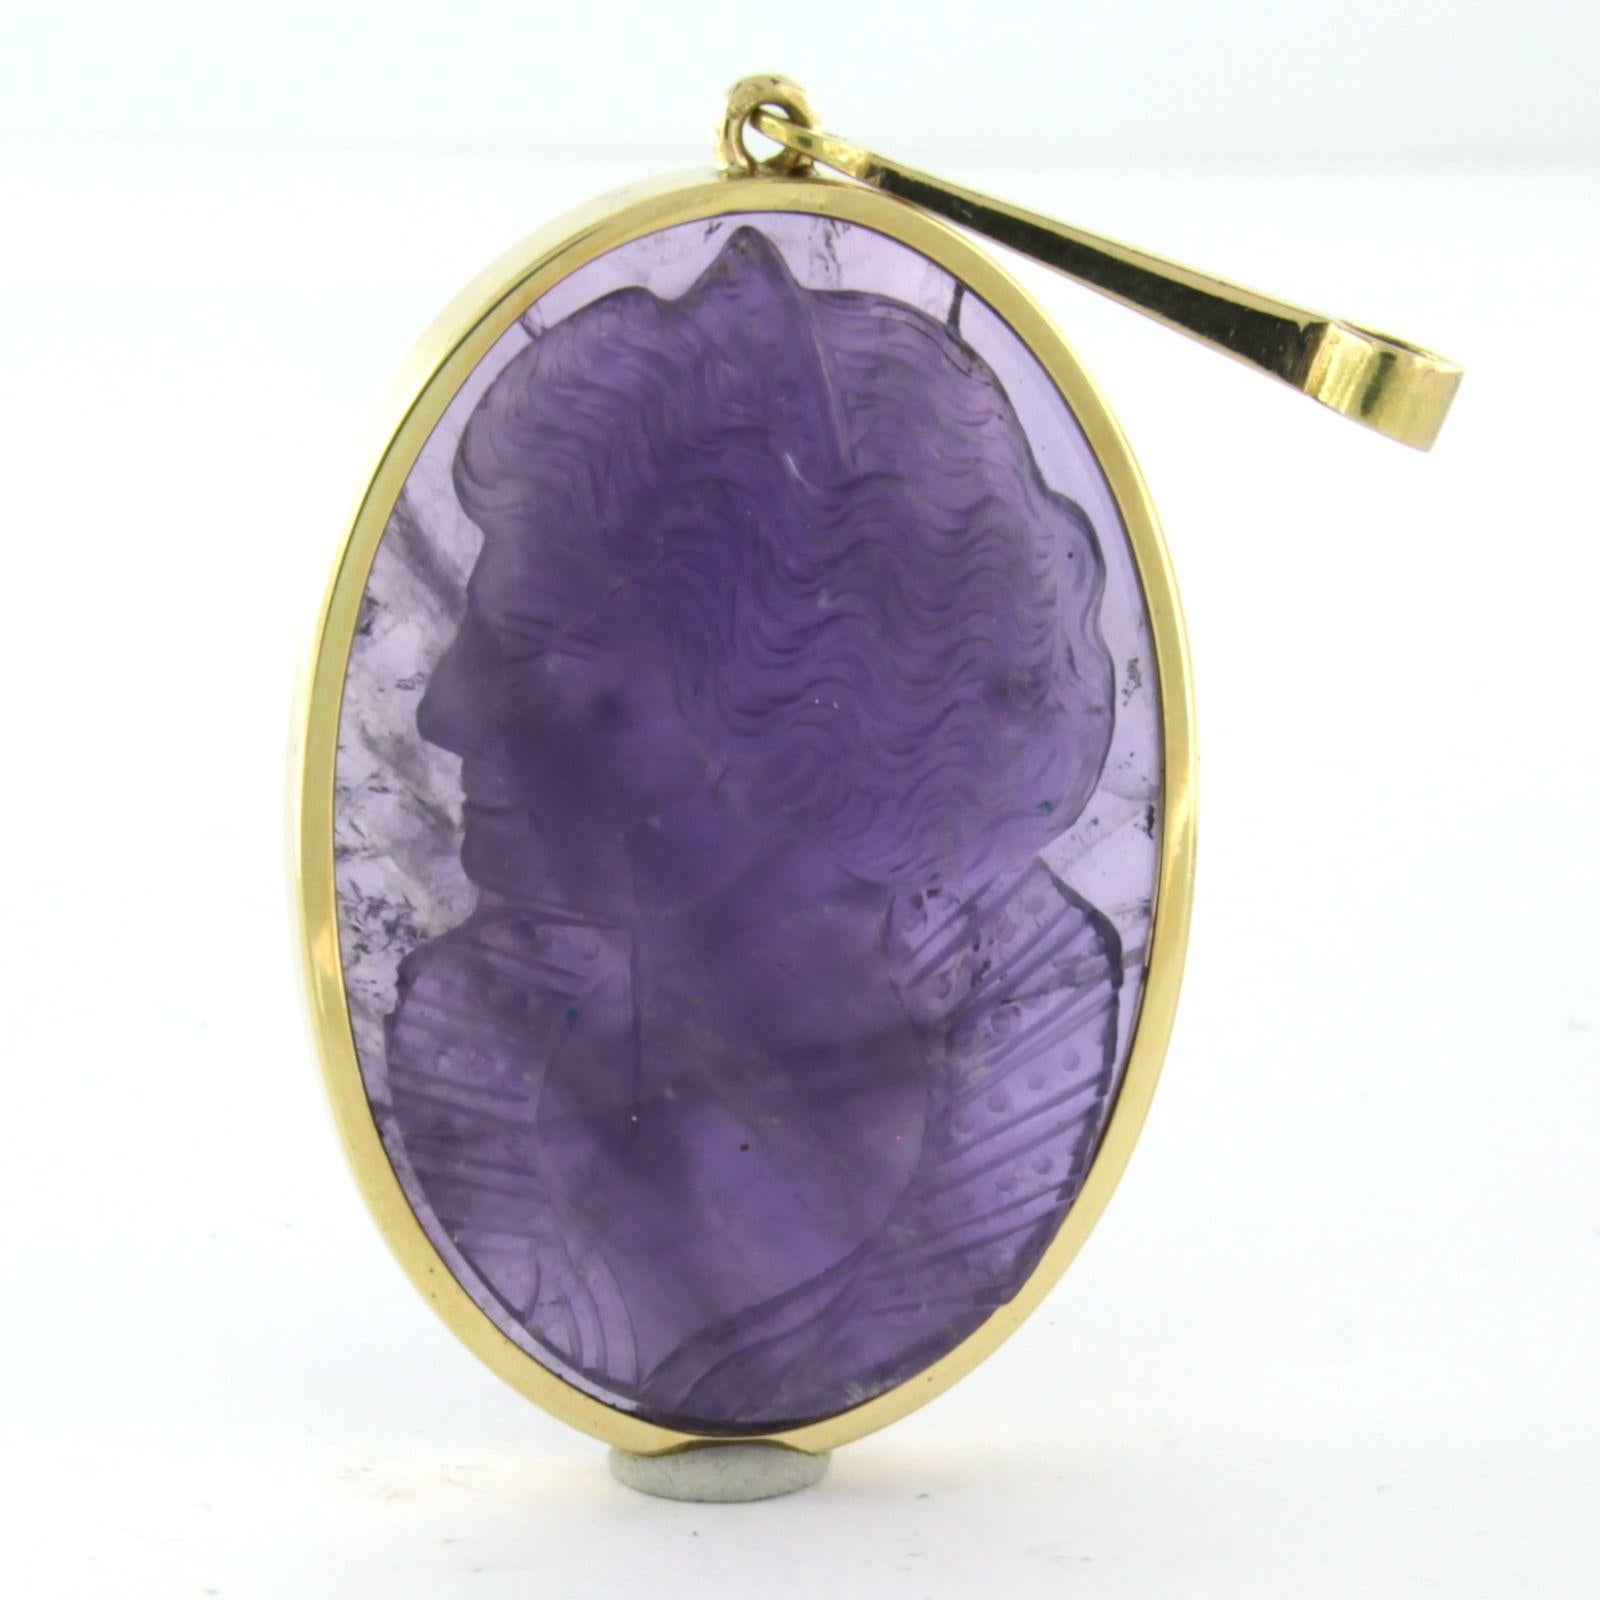 14k yellow gold pendant, set with cameo cut amethyst of a ladies portrait

Detailed description:

The pendant is 6.6 cm long by 3.0 mm wide

weight 17.8 grams

Set with

- 1 x 3.7 cm x 2.7 cm cameo cut amethyst

color purple
clarity VS/SI
Gemstones